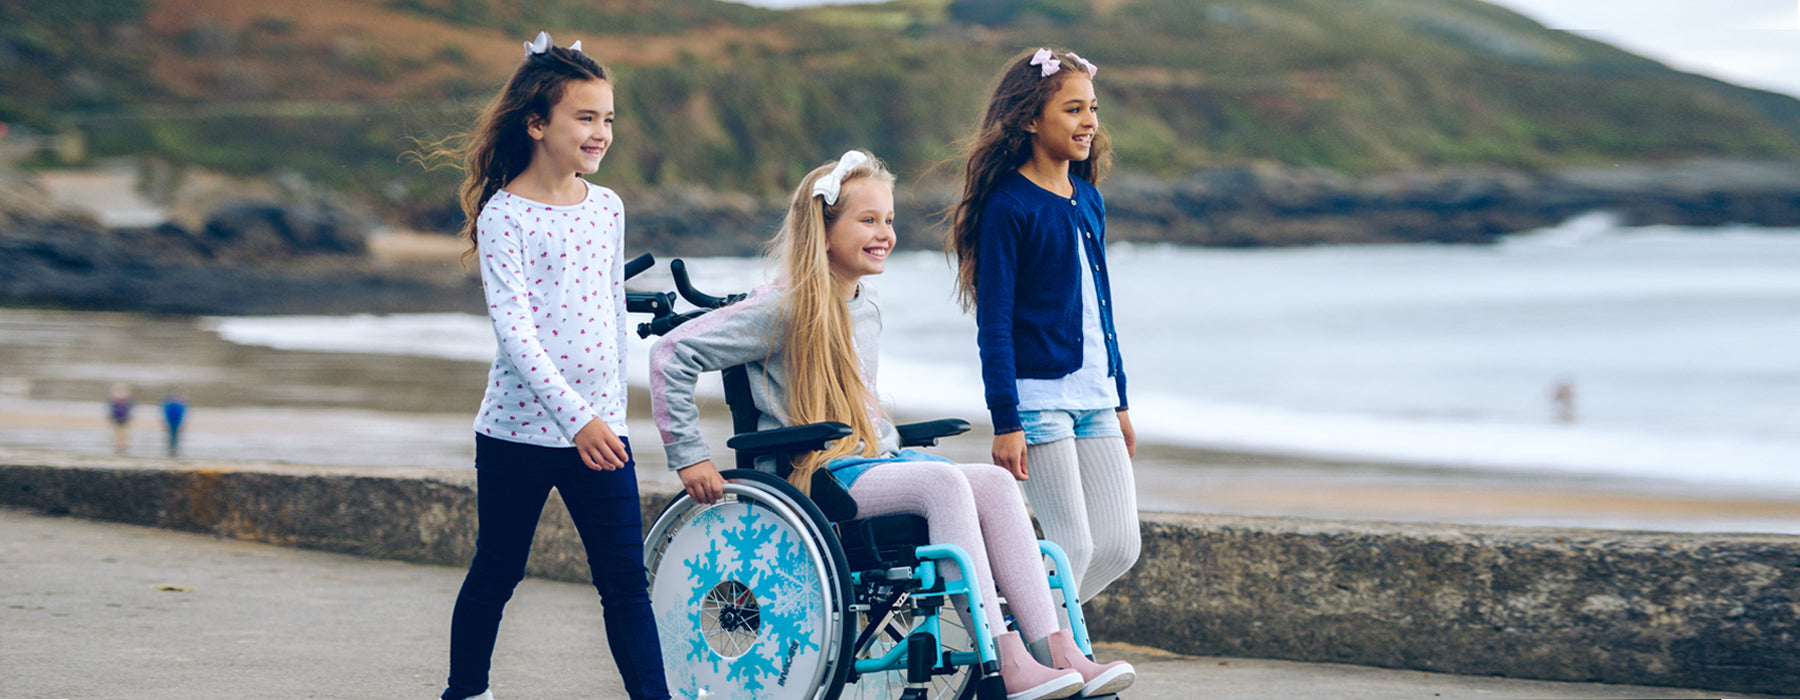 Invacare Action3 Junior is a lightweight, foldable paediatric wheelchair designed for children aged between 3 and 15 years. Action3 Junior has been developed to match the individual needs of the child and can grow as they grow